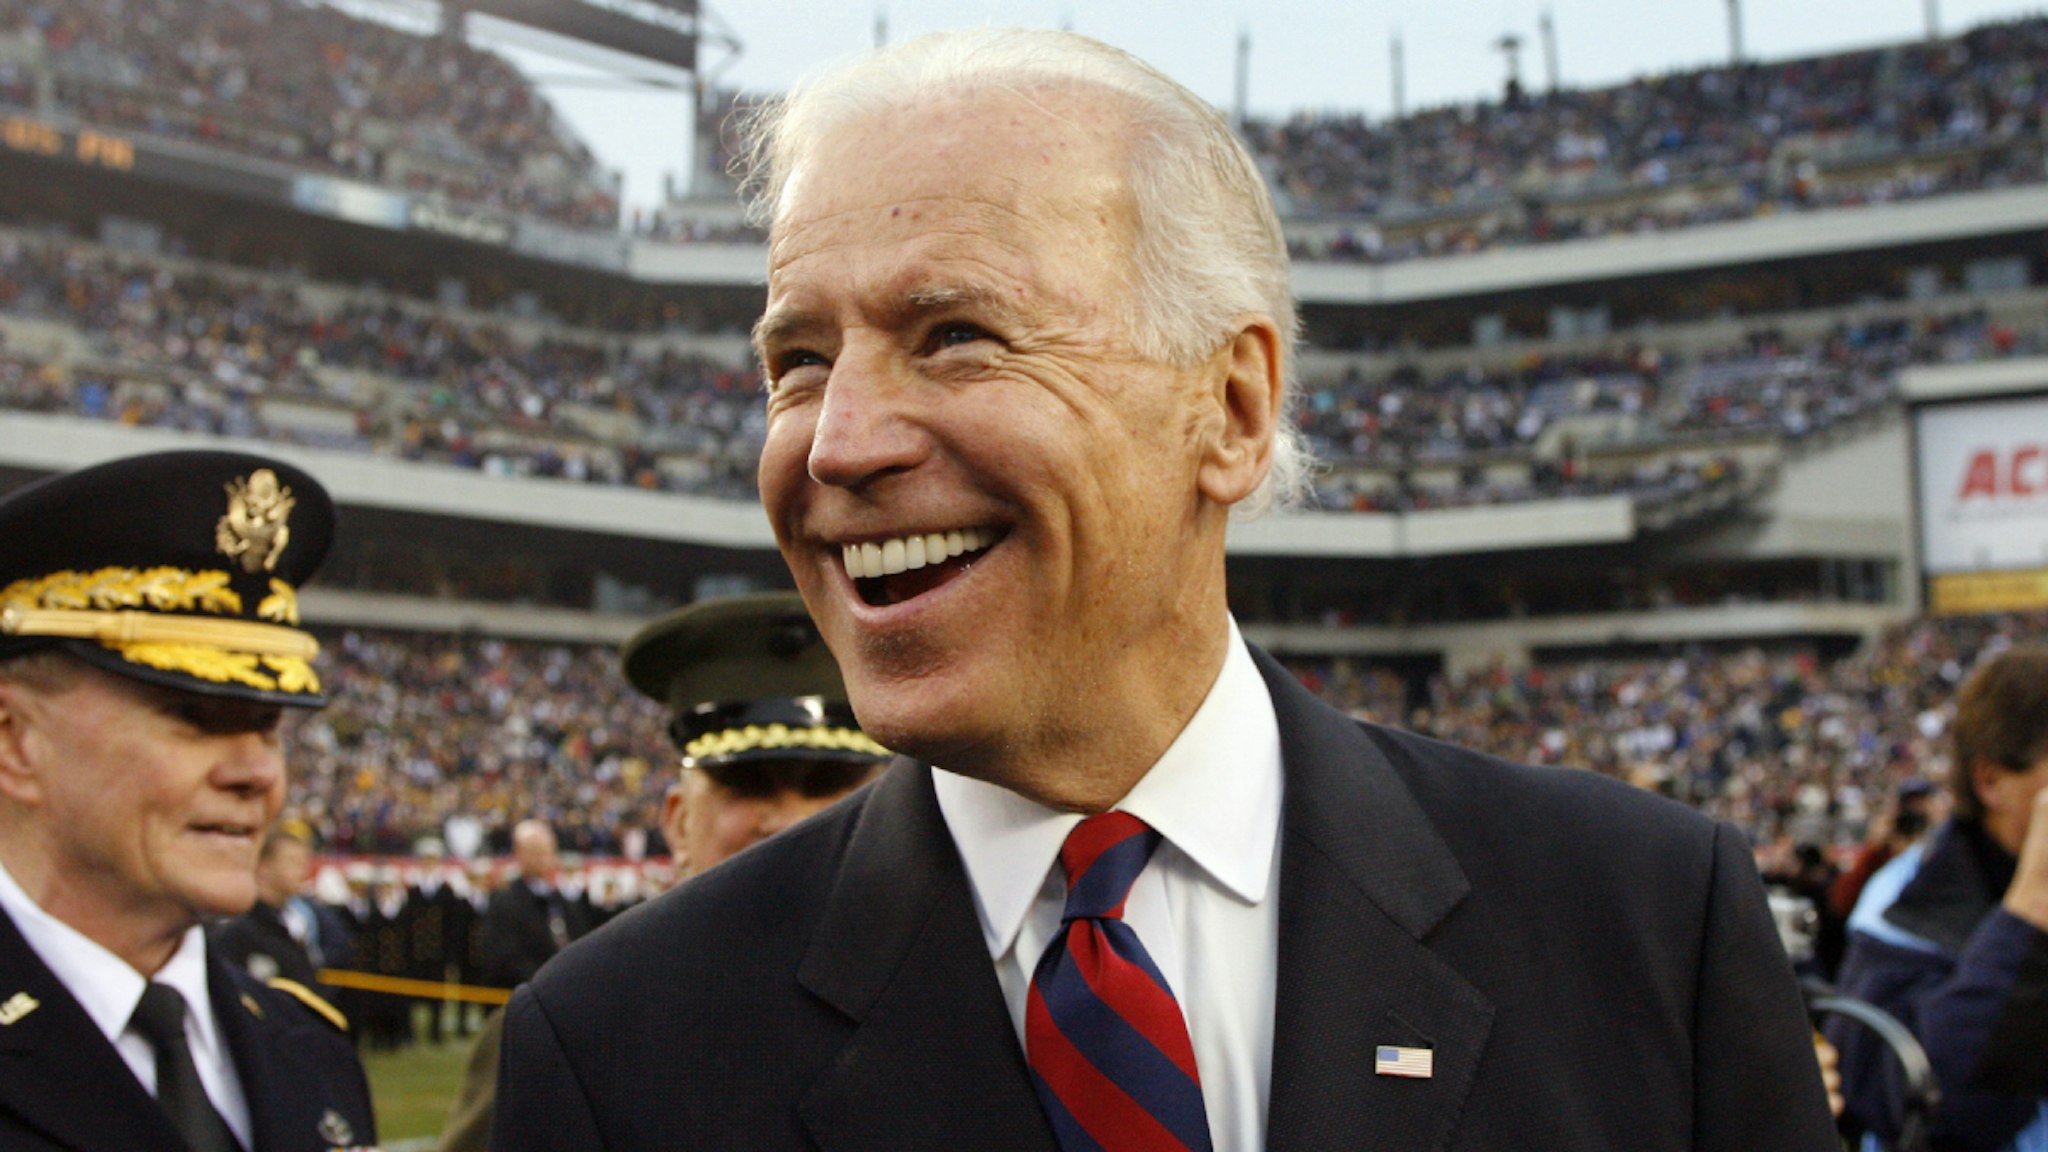 PHILADELPHIA - DECEMBER 8: Vice President of the United States Joe Biden smiles as he stands at midfield during the coin toss before a game between the Army Black Knights and the Navy Midshipmen on December 8, 2012 at Lincoln Financial Field in Philadelphia, Pennsylvania.